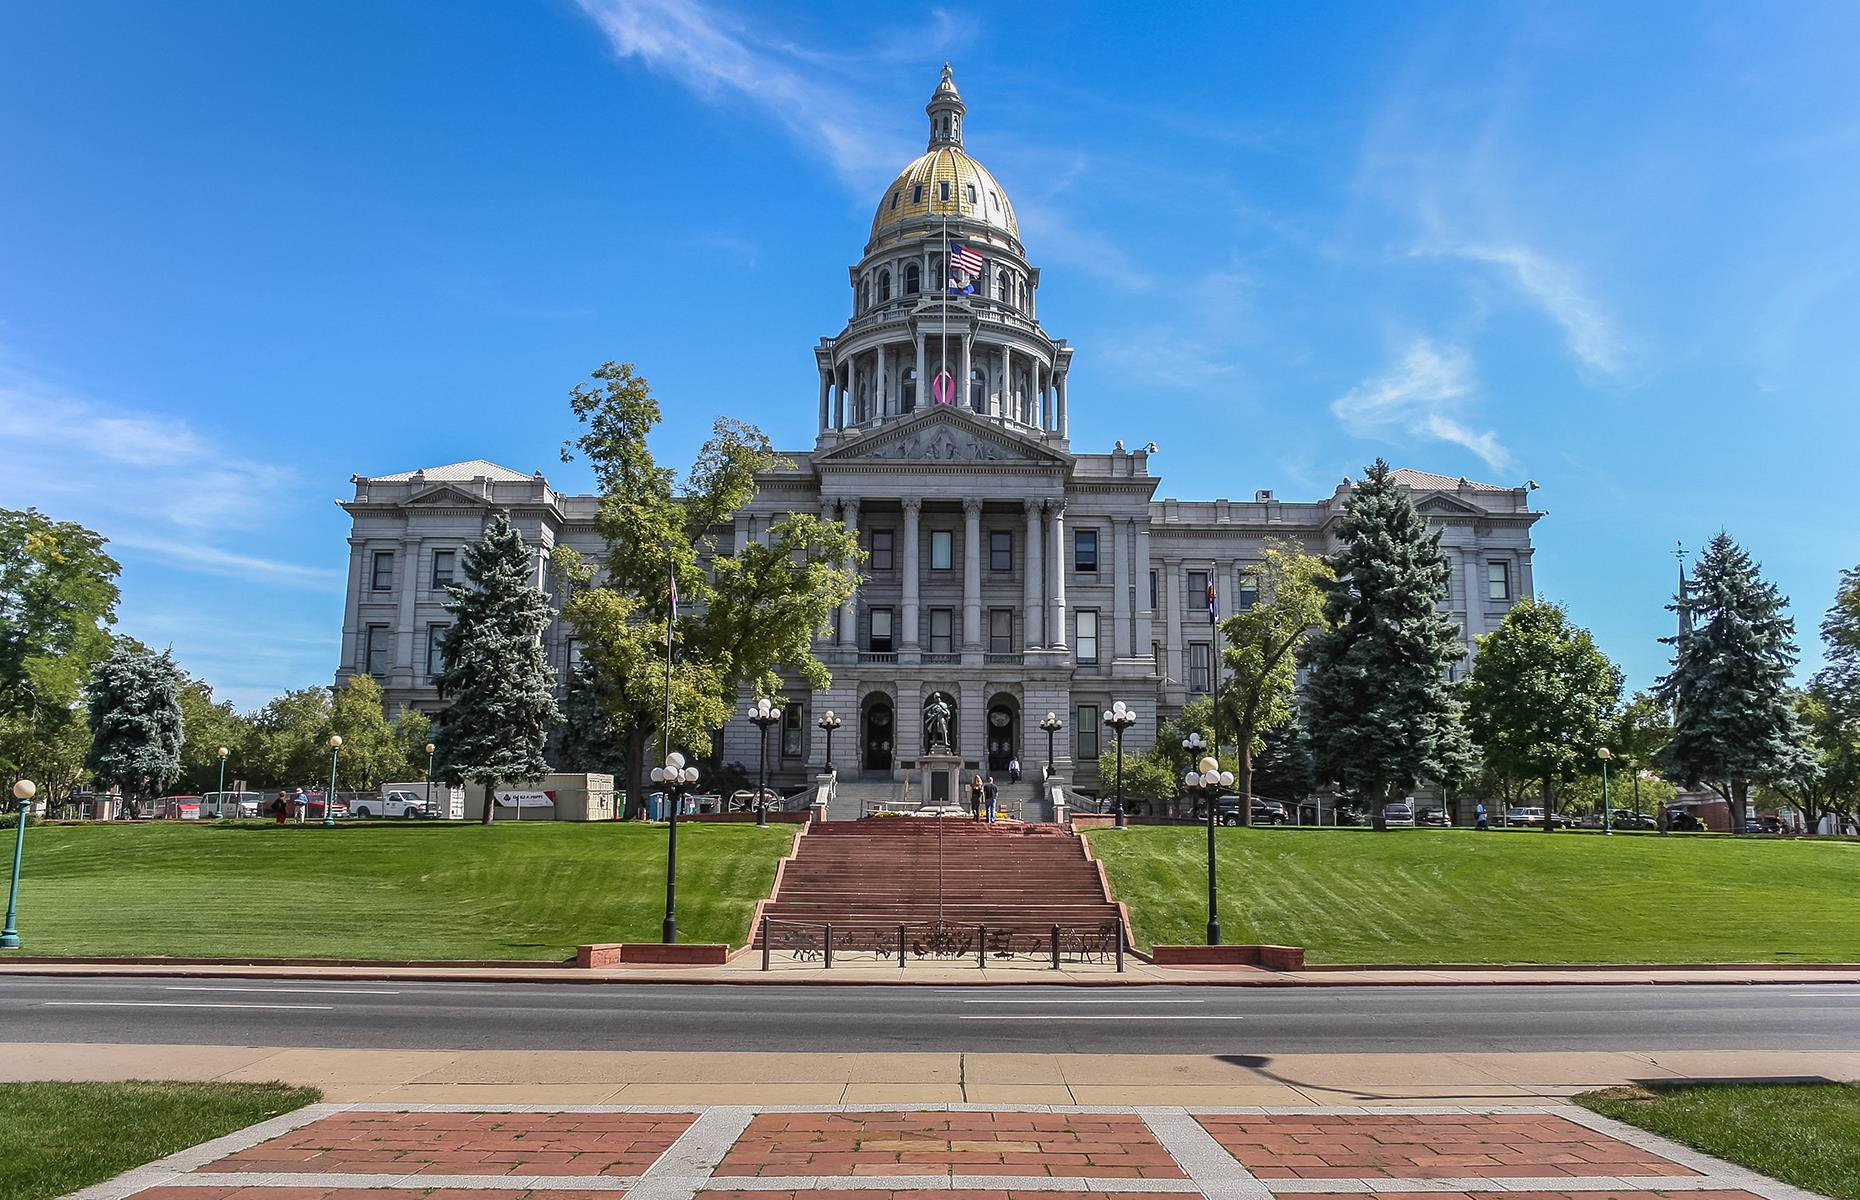 Located in the heart of Denver, this magnificent building was completed in 1894. Built in a Neoclassical style, the Capitol's stunning gold dome rises 272 feet (83m) and was covered in gold leaf in 1908 to commemorate the Colorado Gold Rush. Inside, visitors can admire the intricate marble work, wood paneling and stained-glass windows. Free guided tours are available and include a visit to both chambers for a peek at the state's legislative process.